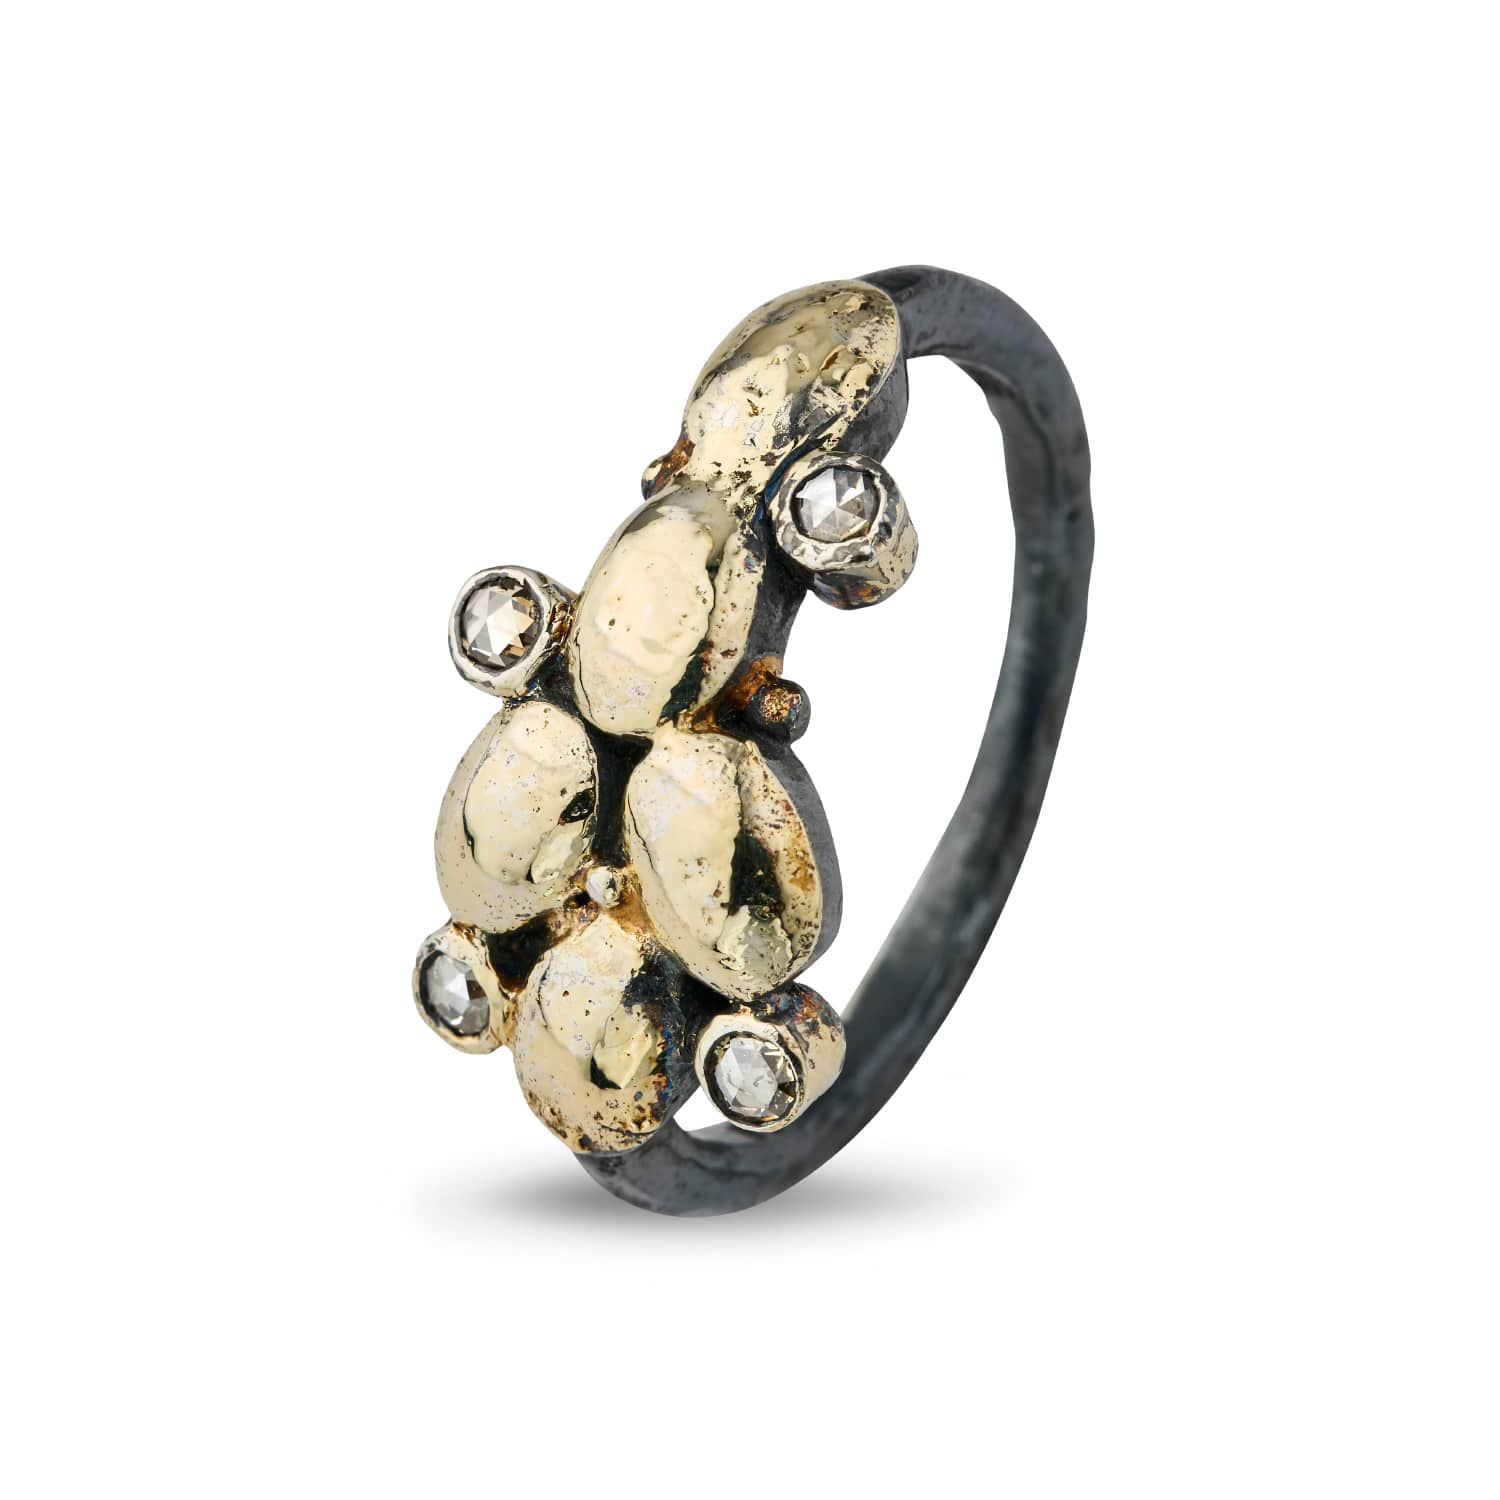 Leaf shaped ring made out of gold and diamonds